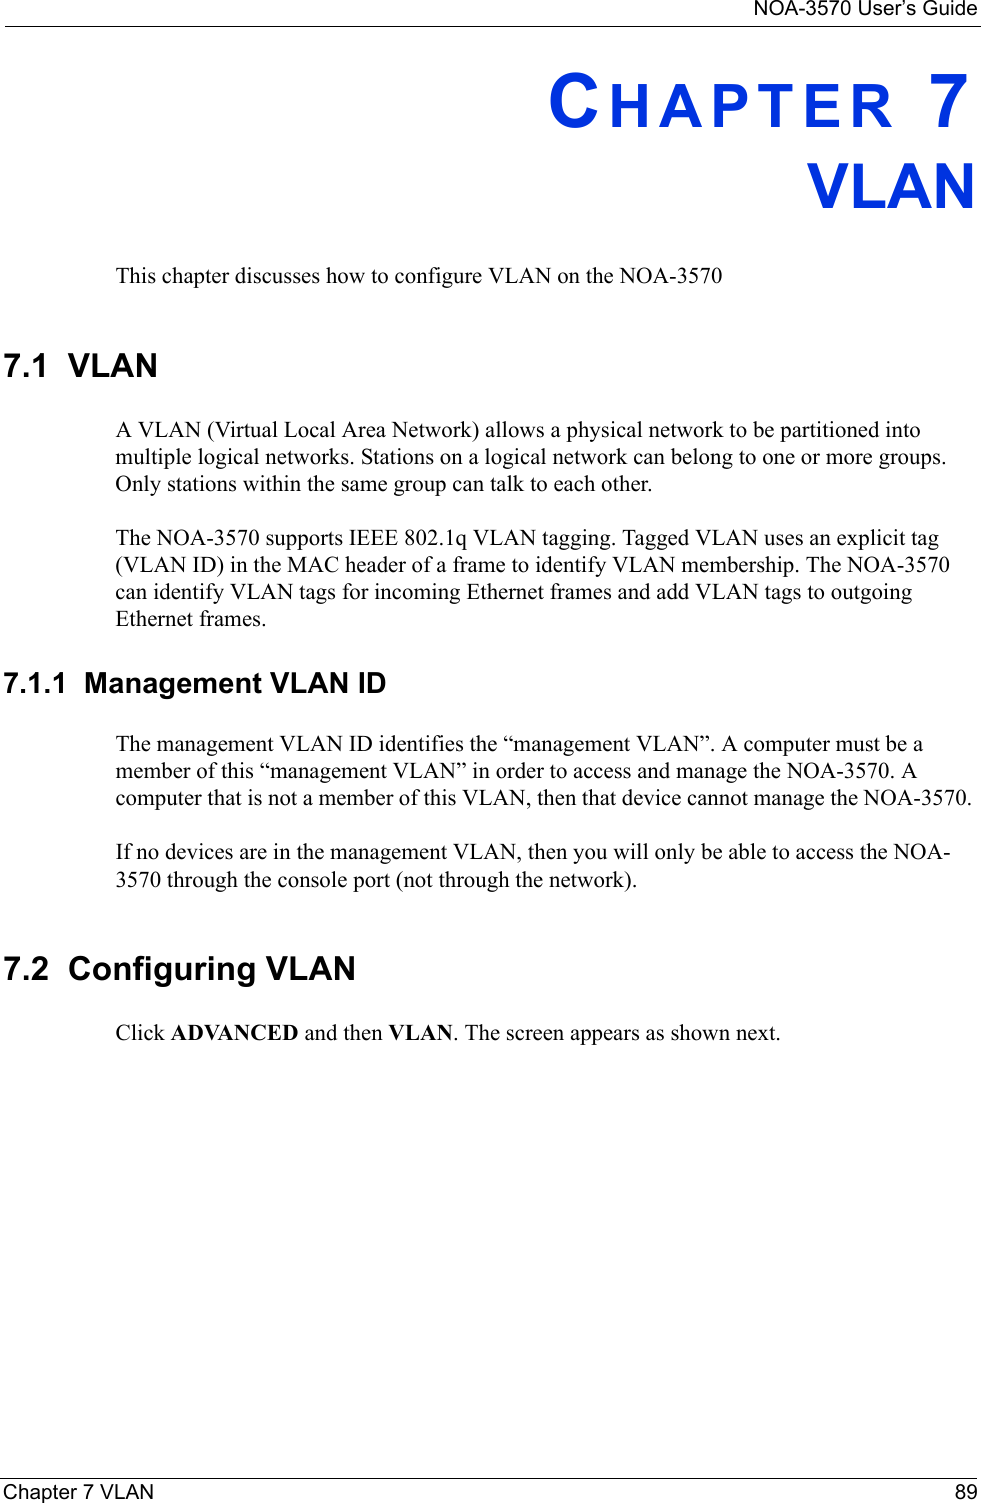 NOA-3570 User’s GuideChapter 7 VLAN 89CHAPTER 7VLANThis chapter discusses how to configure VLAN on the NOA-35707.1  VLANA VLAN (Virtual Local Area Network) allows a physical network to be partitioned into multiple logical networks. Stations on a logical network can belong to one or more groups. Only stations within the same group can talk to each other.The NOA-3570 supports IEEE 802.1q VLAN tagging. Tagged VLAN uses an explicit tag (VLAN ID) in the MAC header of a frame to identify VLAN membership. The NOA-3570 can identify VLAN tags for incoming Ethernet frames and add VLAN tags to outgoing Ethernet frames. 7.1.1  Management VLAN IDThe management VLAN ID identifies the “management VLAN”. A computer must be a member of this “management VLAN” in order to access and manage the NOA-3570. A computer that is not a member of this VLAN, then that device cannot manage the NOA-3570. If no devices are in the management VLAN, then you will only be able to access the NOA-3570 through the console port (not through the network).7.2  Configuring VLANClick ADVANCED and then VLAN. The screen appears as shown next.